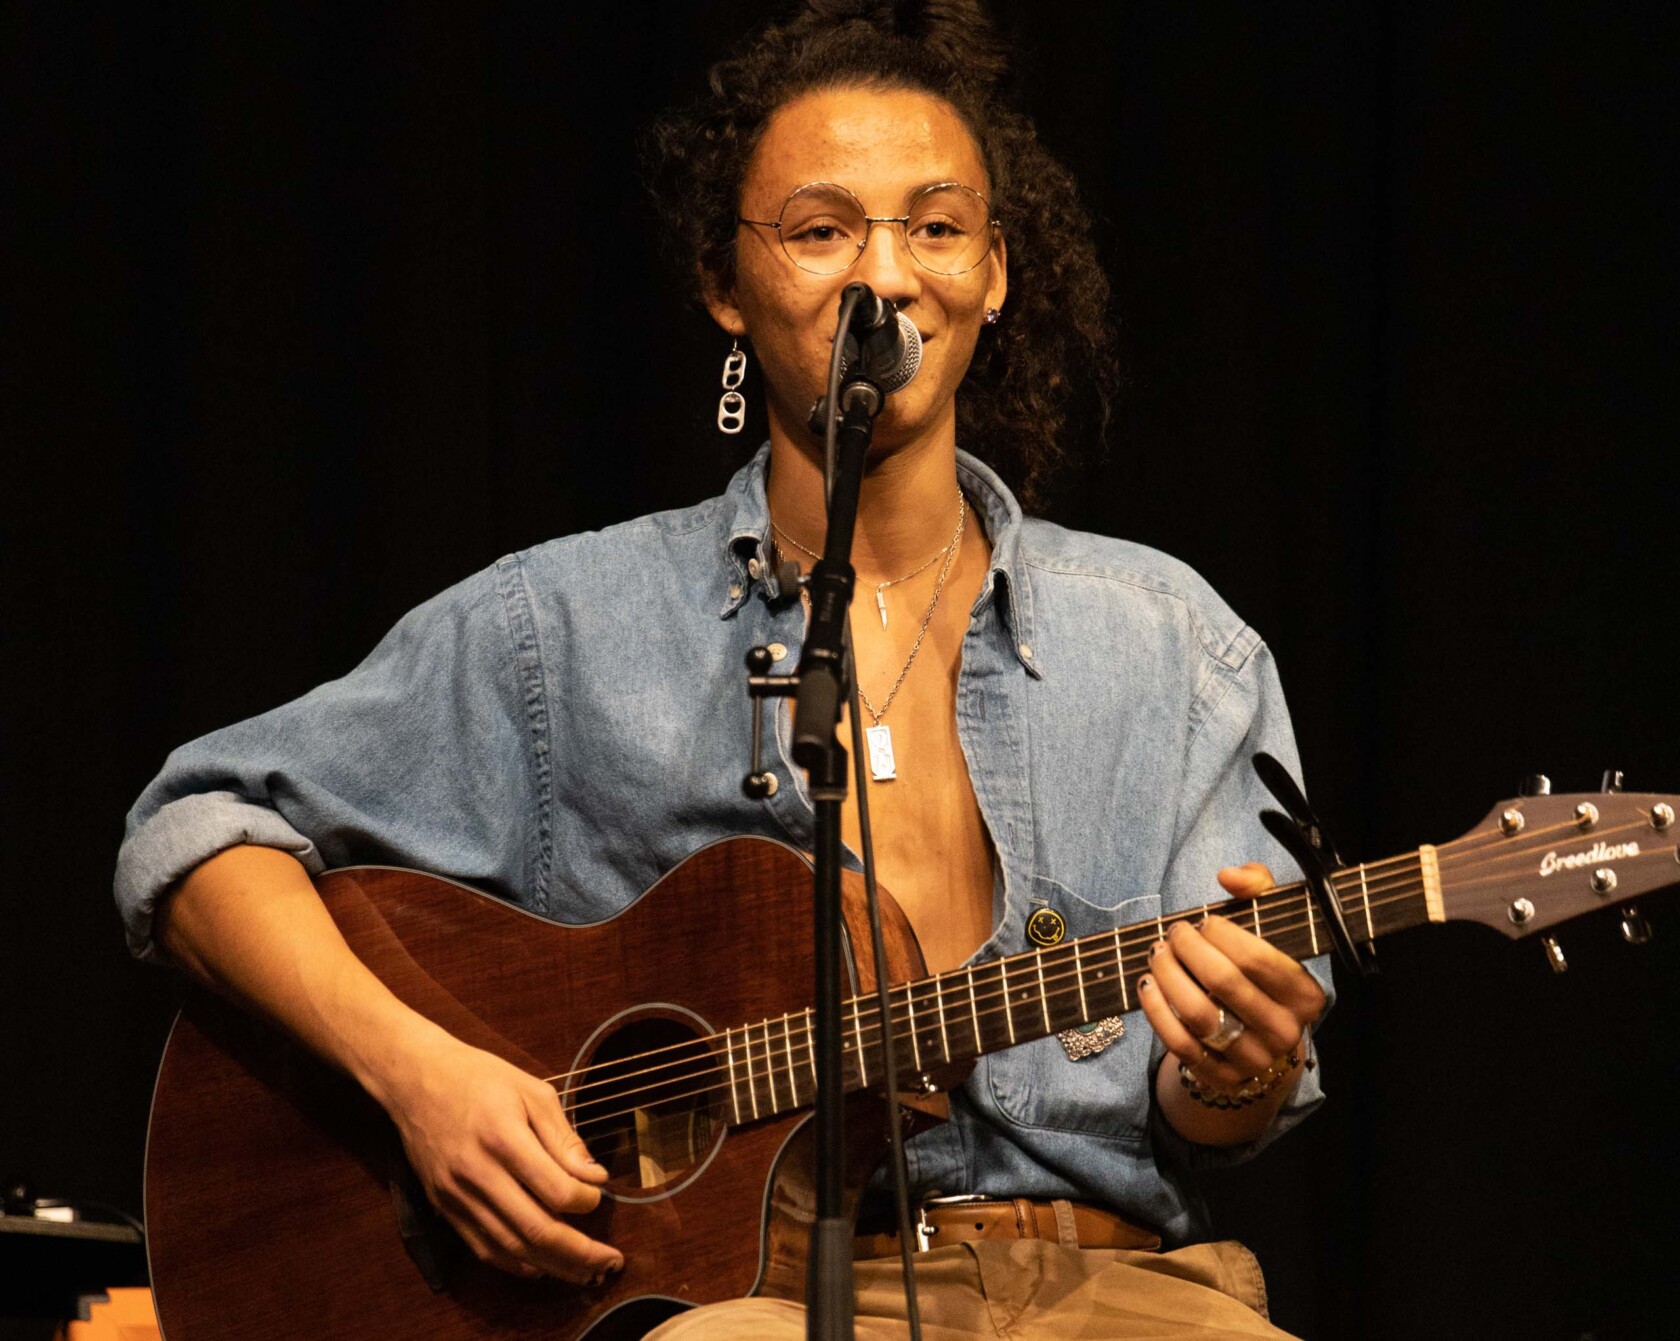 A student performing for a songwriting concert.